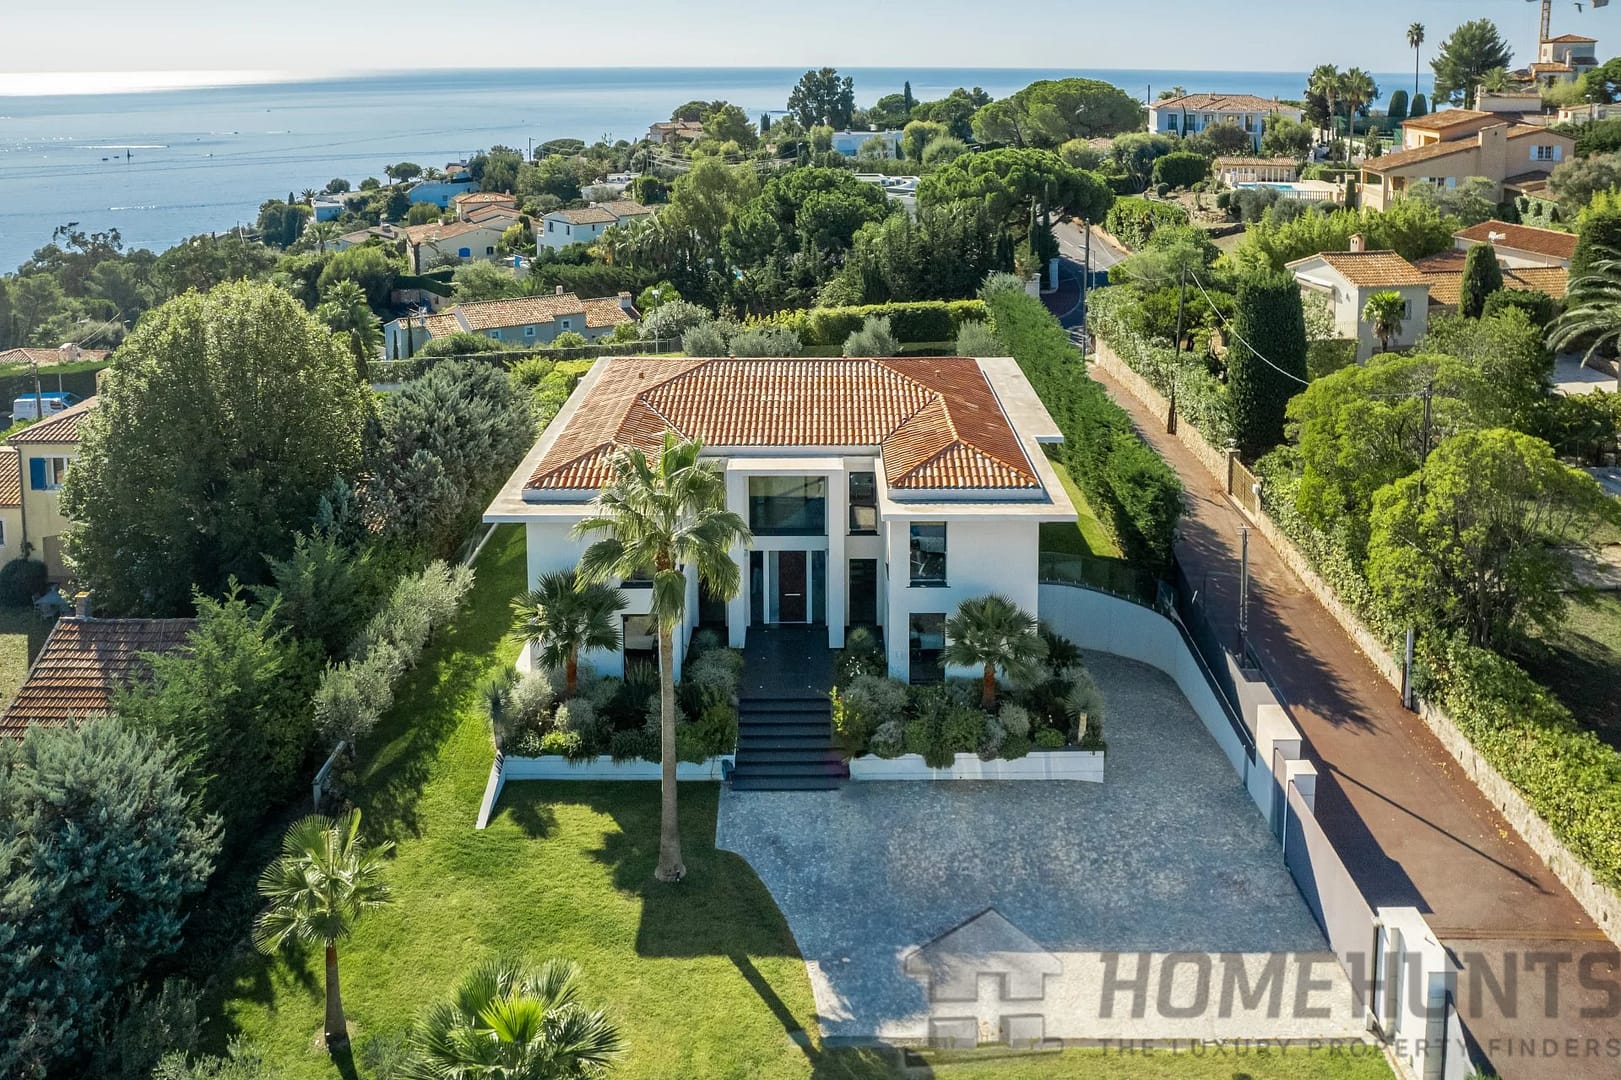 5 Bedroom Villa/House in Cannes 9